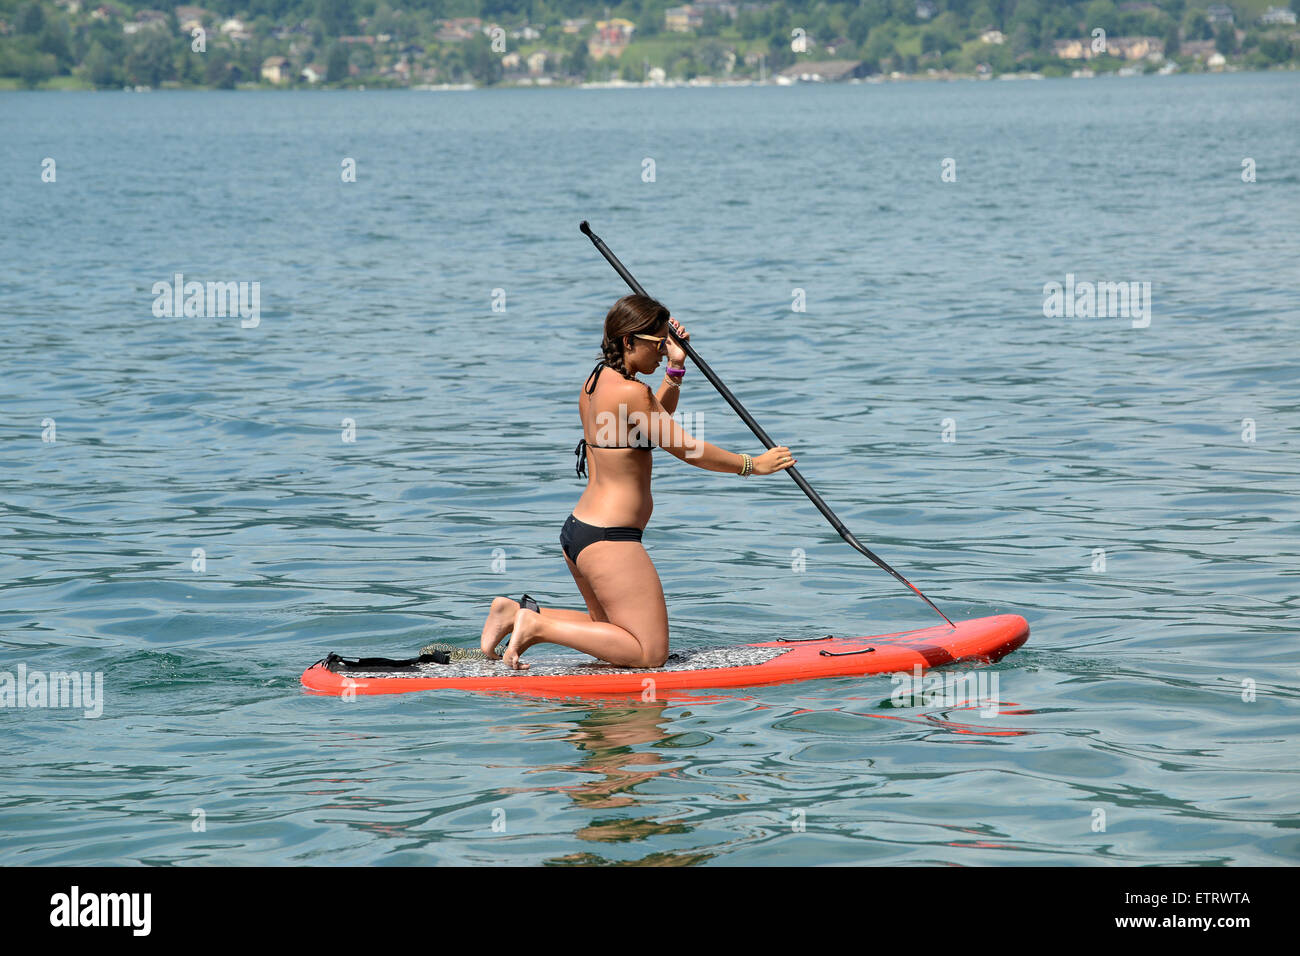 Woman in bikini Stand up paddle surfing or standing paddle boarding on Lake Annecy in France Stock Photo